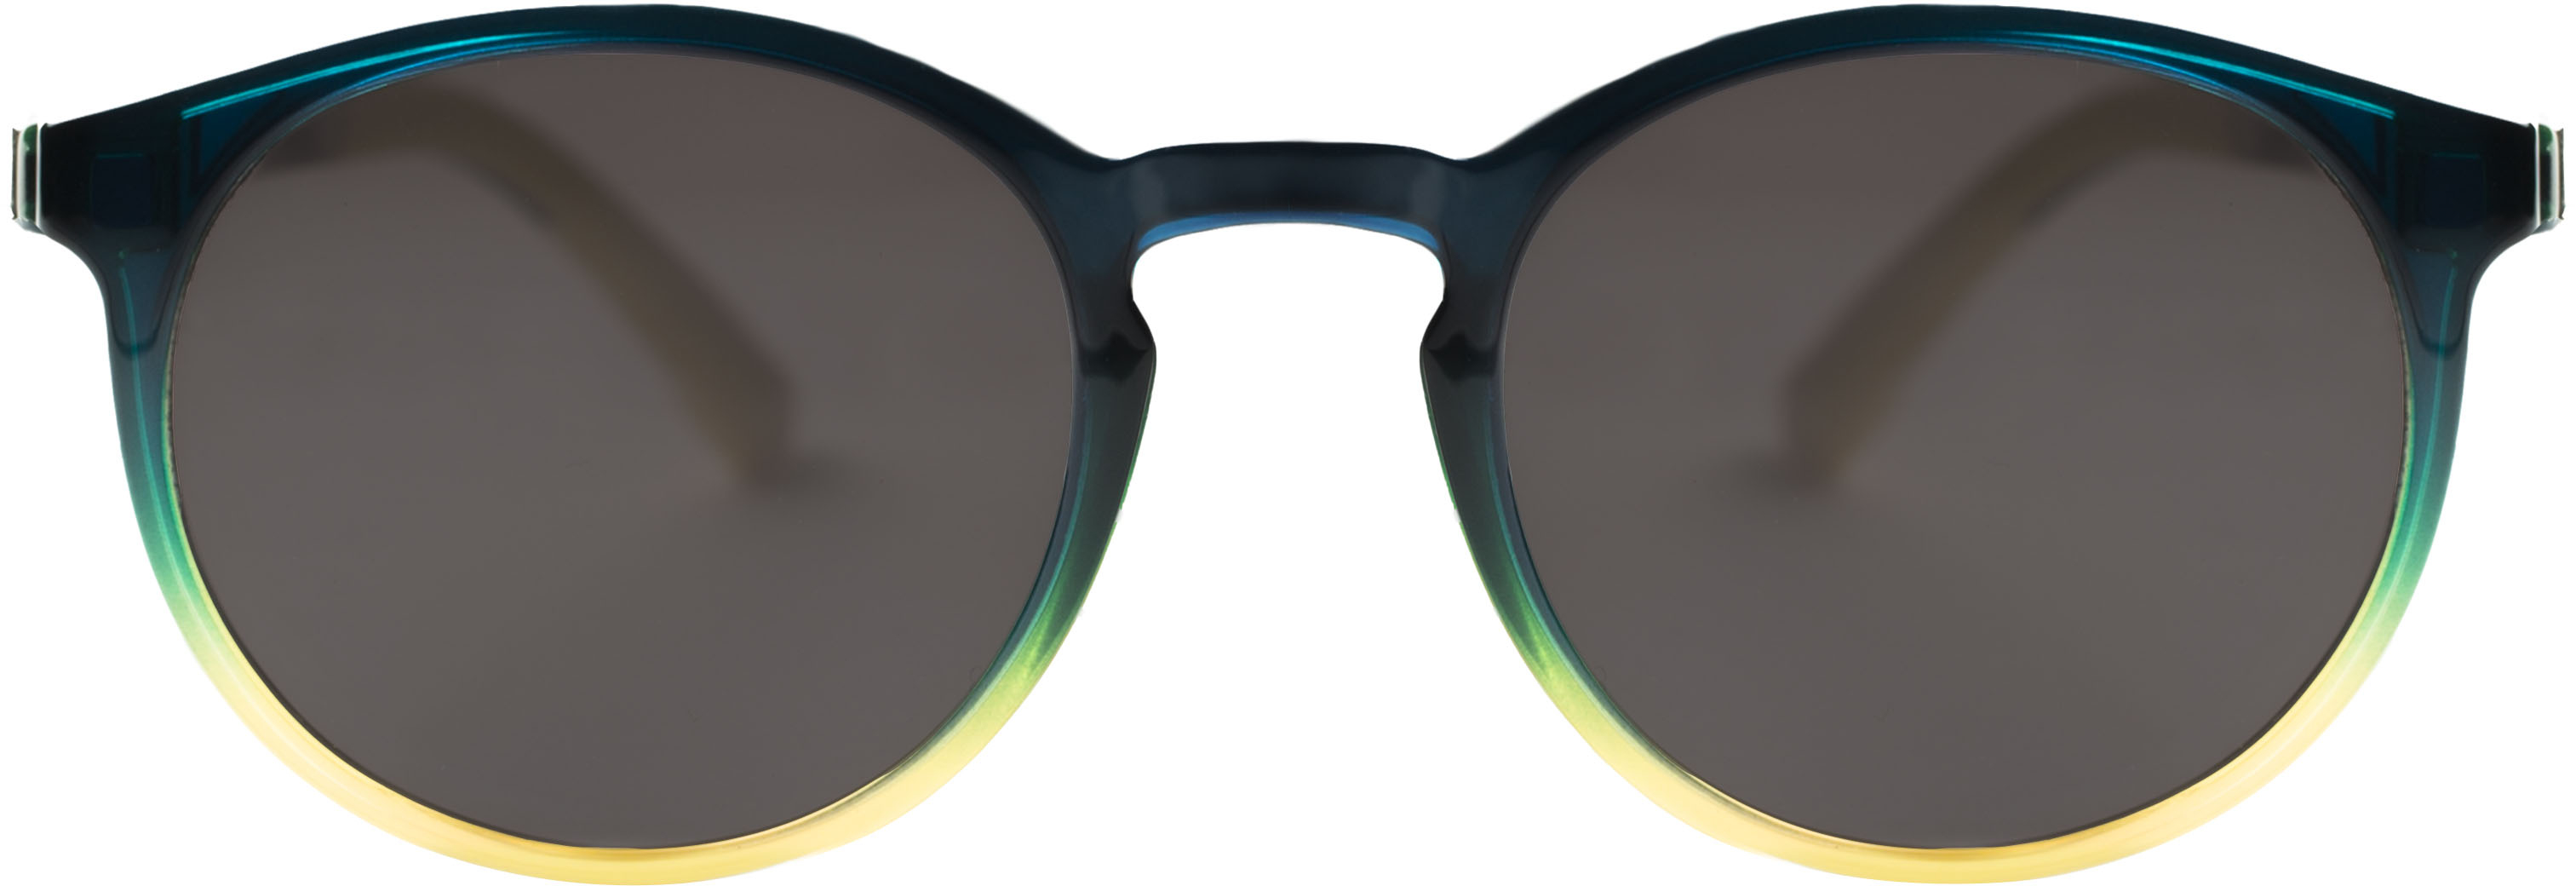 Angle View: Wavebalance - BlueDuo, Poet, Blue Light Reducing Glasses with Magnetic Sunglass Clip-On- Tie Dye - Blue & Yellow